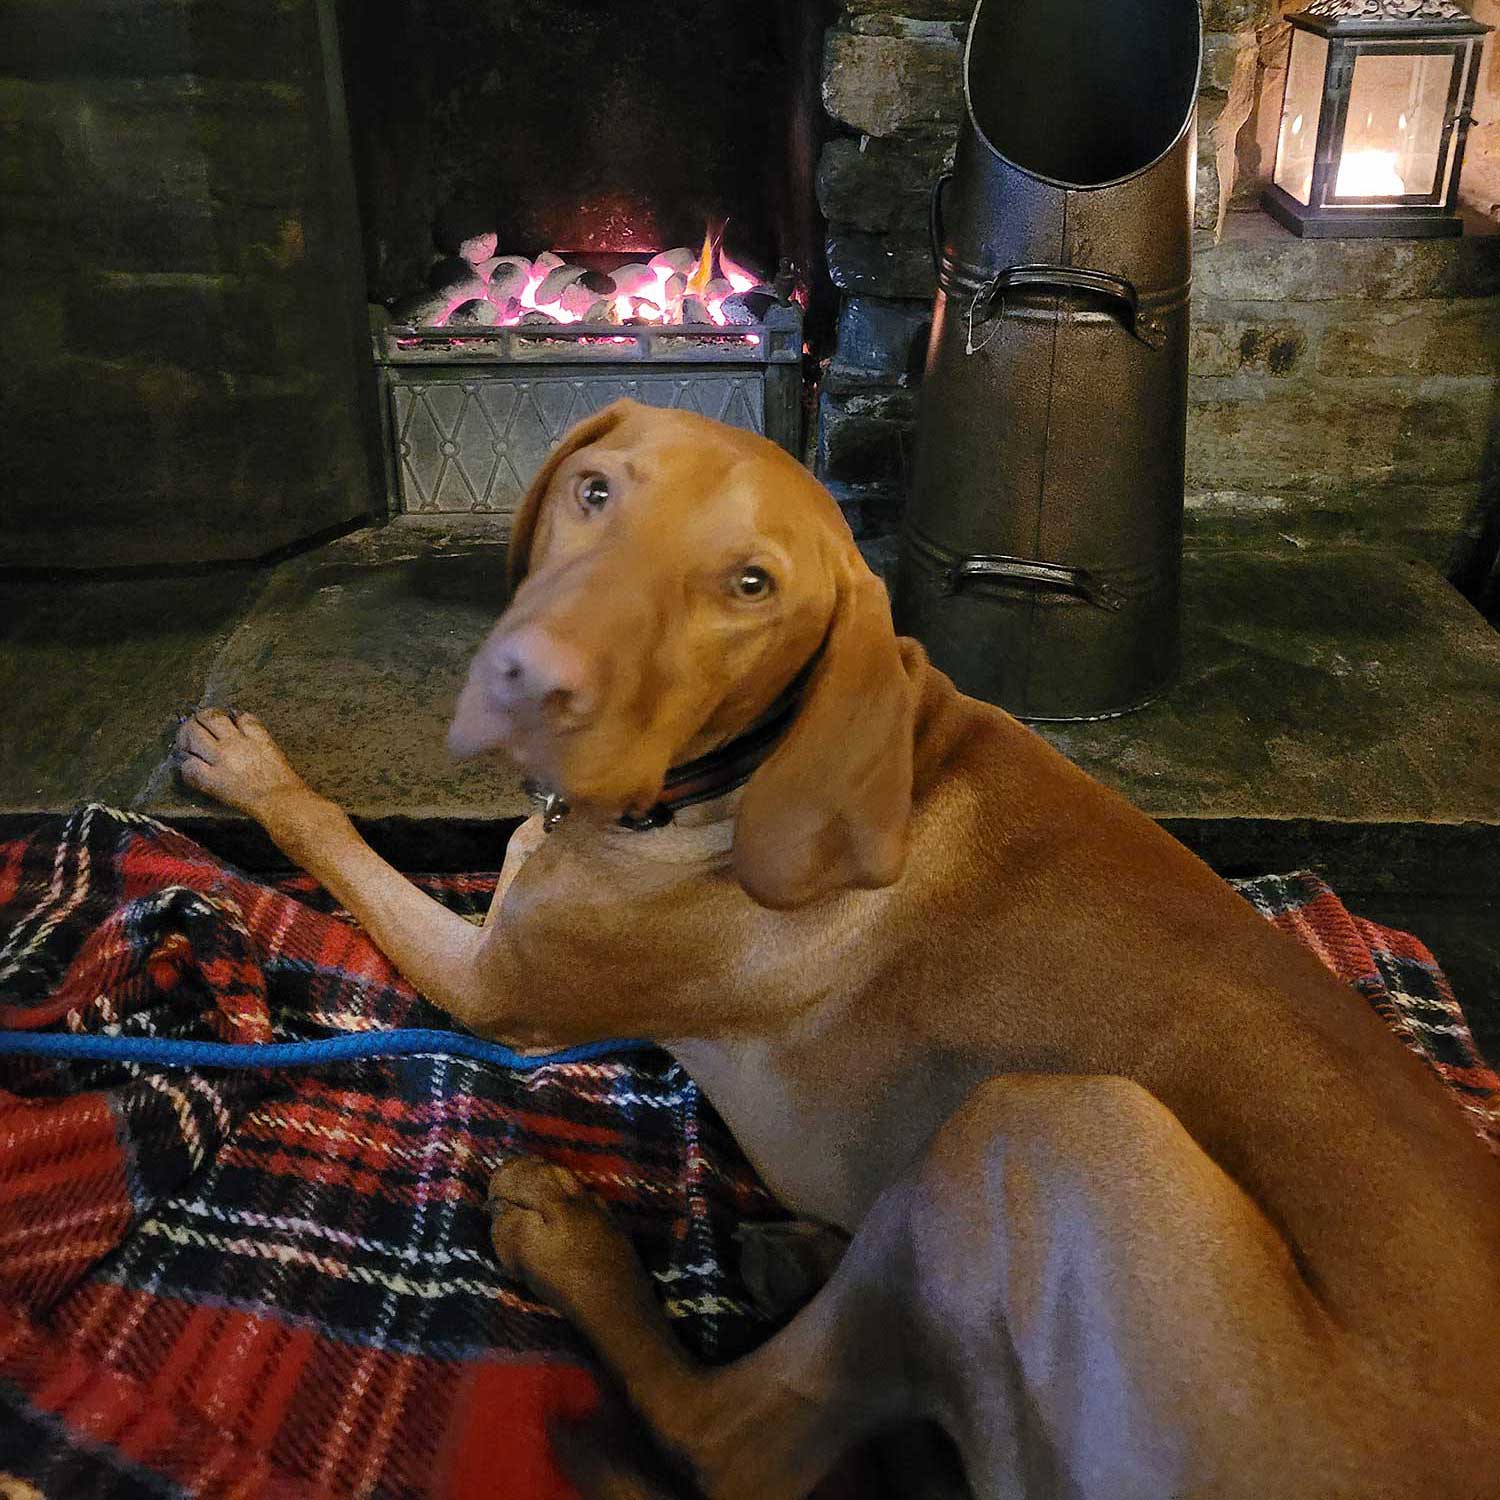 Dog in front of fire